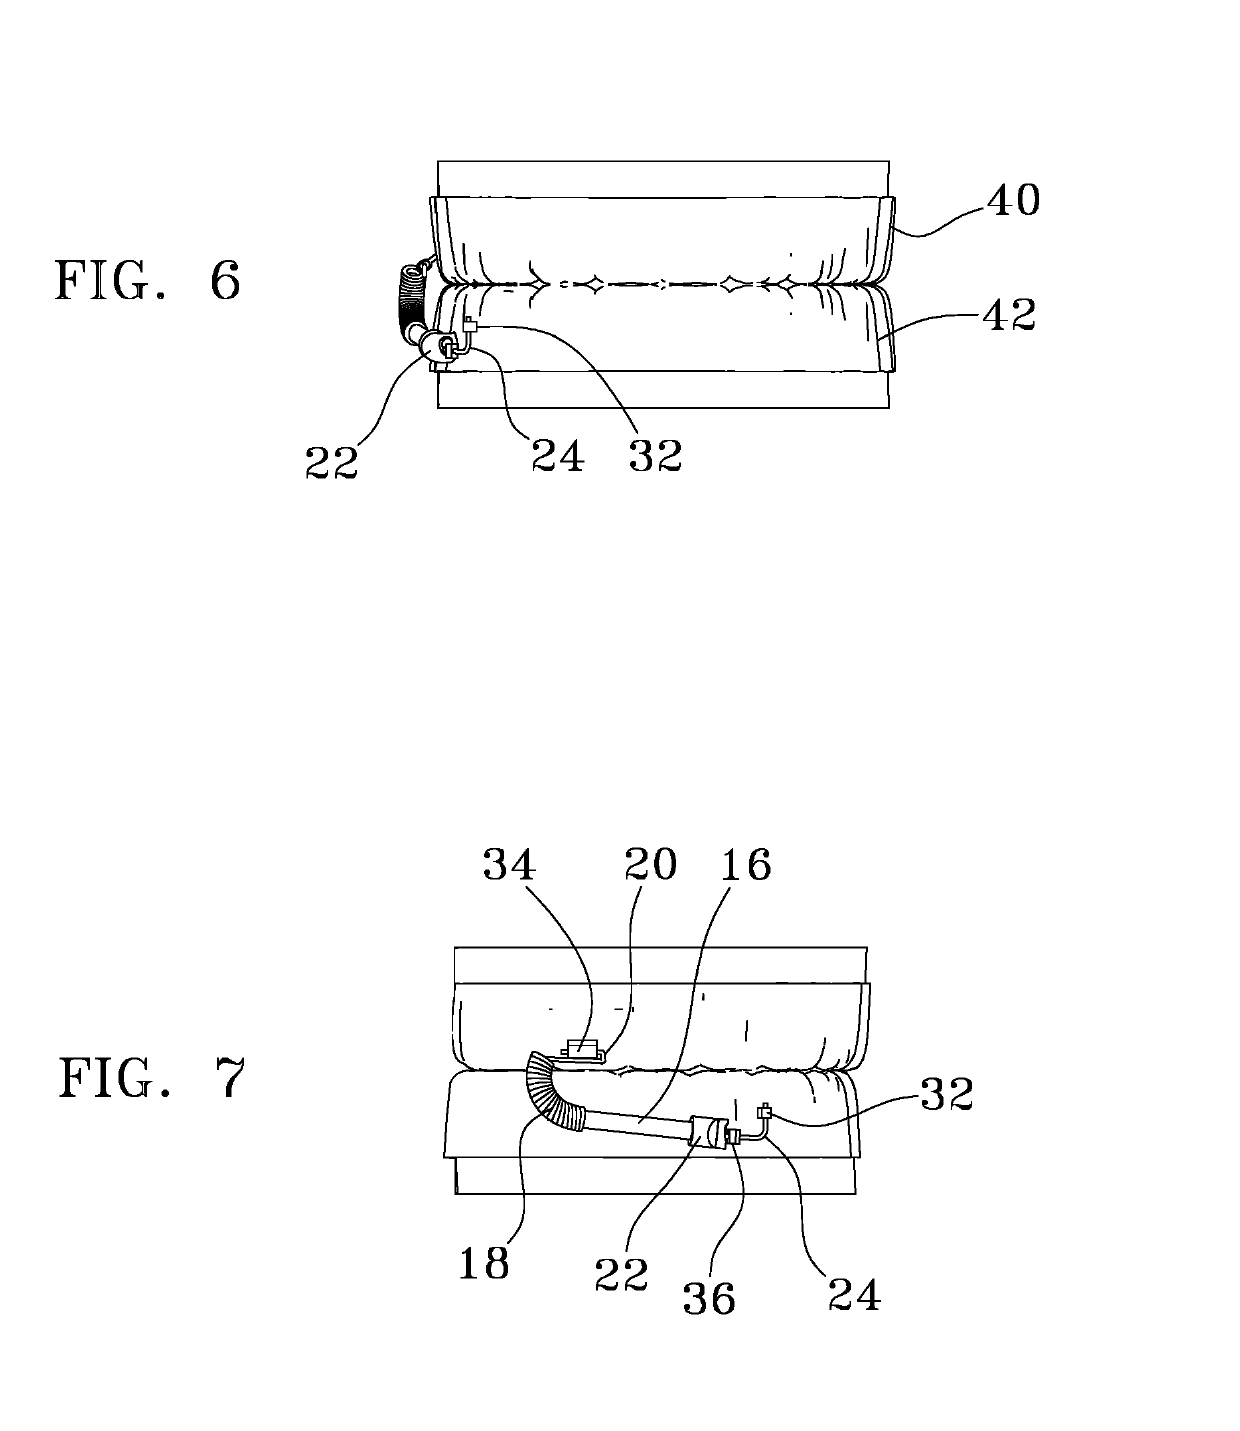 Method and apparatus for orthodontic corrections